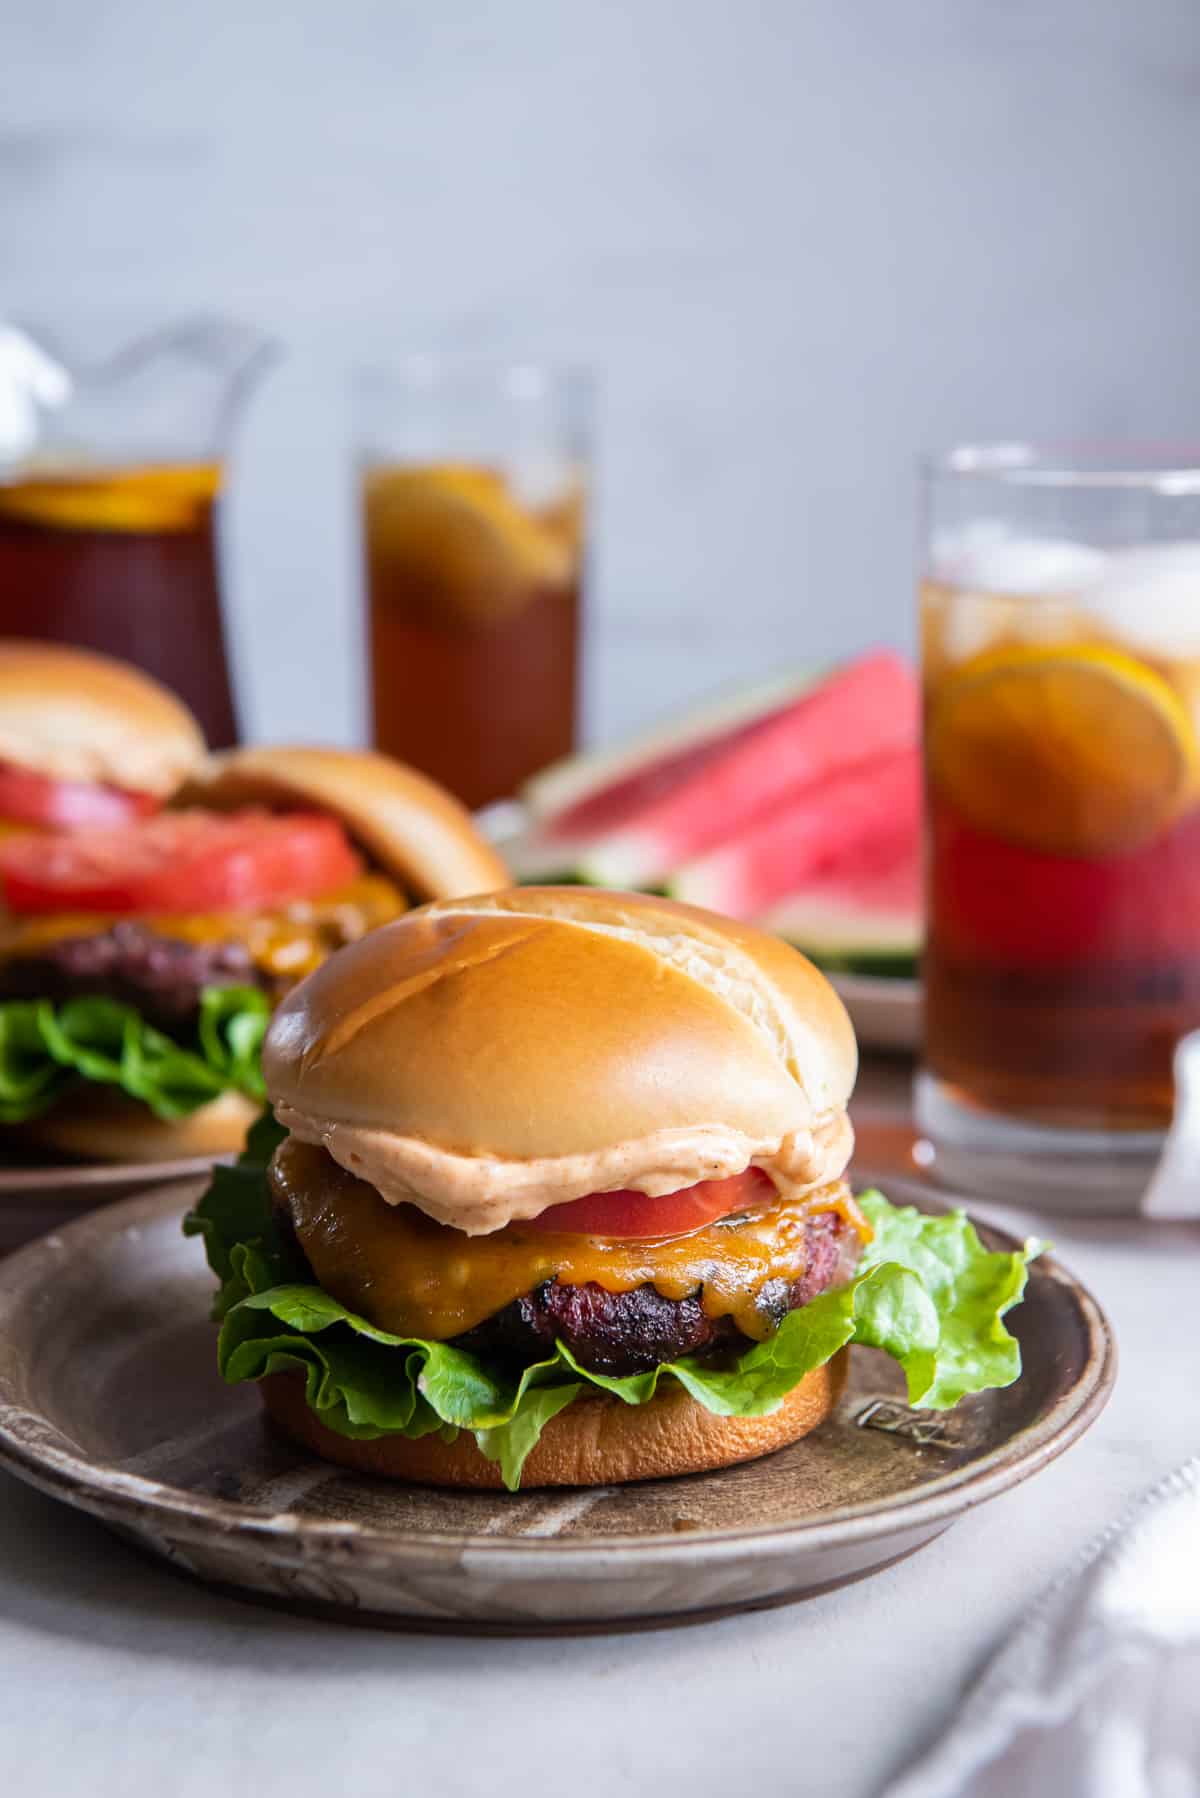 A Ranch Burger on a wood plate in front of iced tea and watermelon.